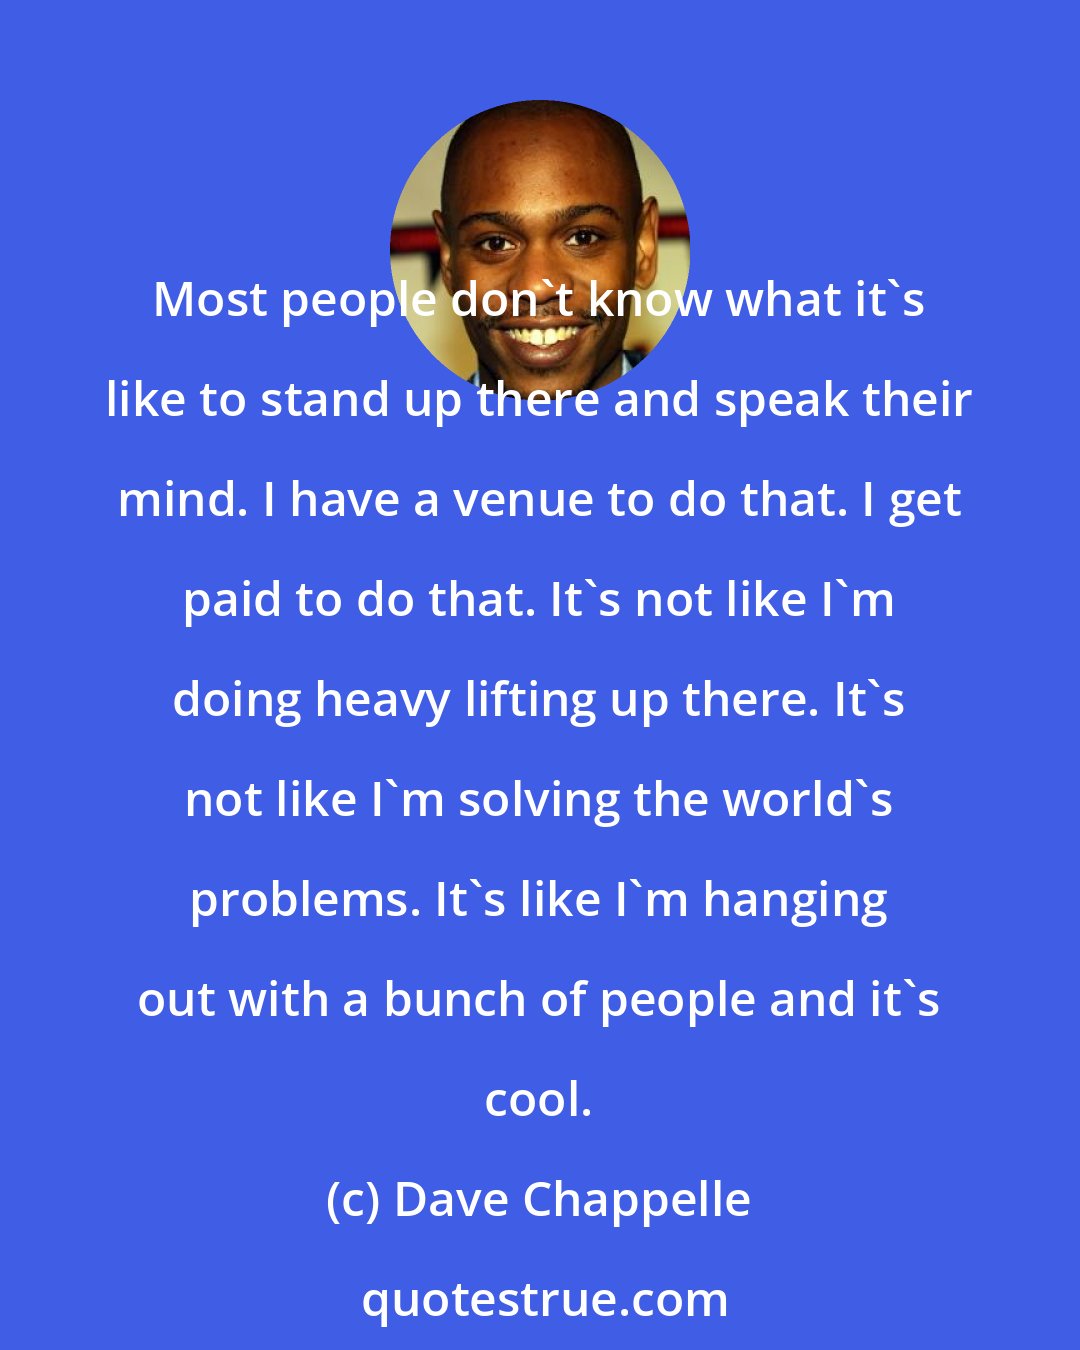 Dave Chappelle: Most people don't know what it's like to stand up there and speak their mind. I have a venue to do that. I get paid to do that. It's not like I'm doing heavy lifting up there. It's not like I'm solving the world's problems. It's like I'm hanging out with a bunch of people and it's cool.